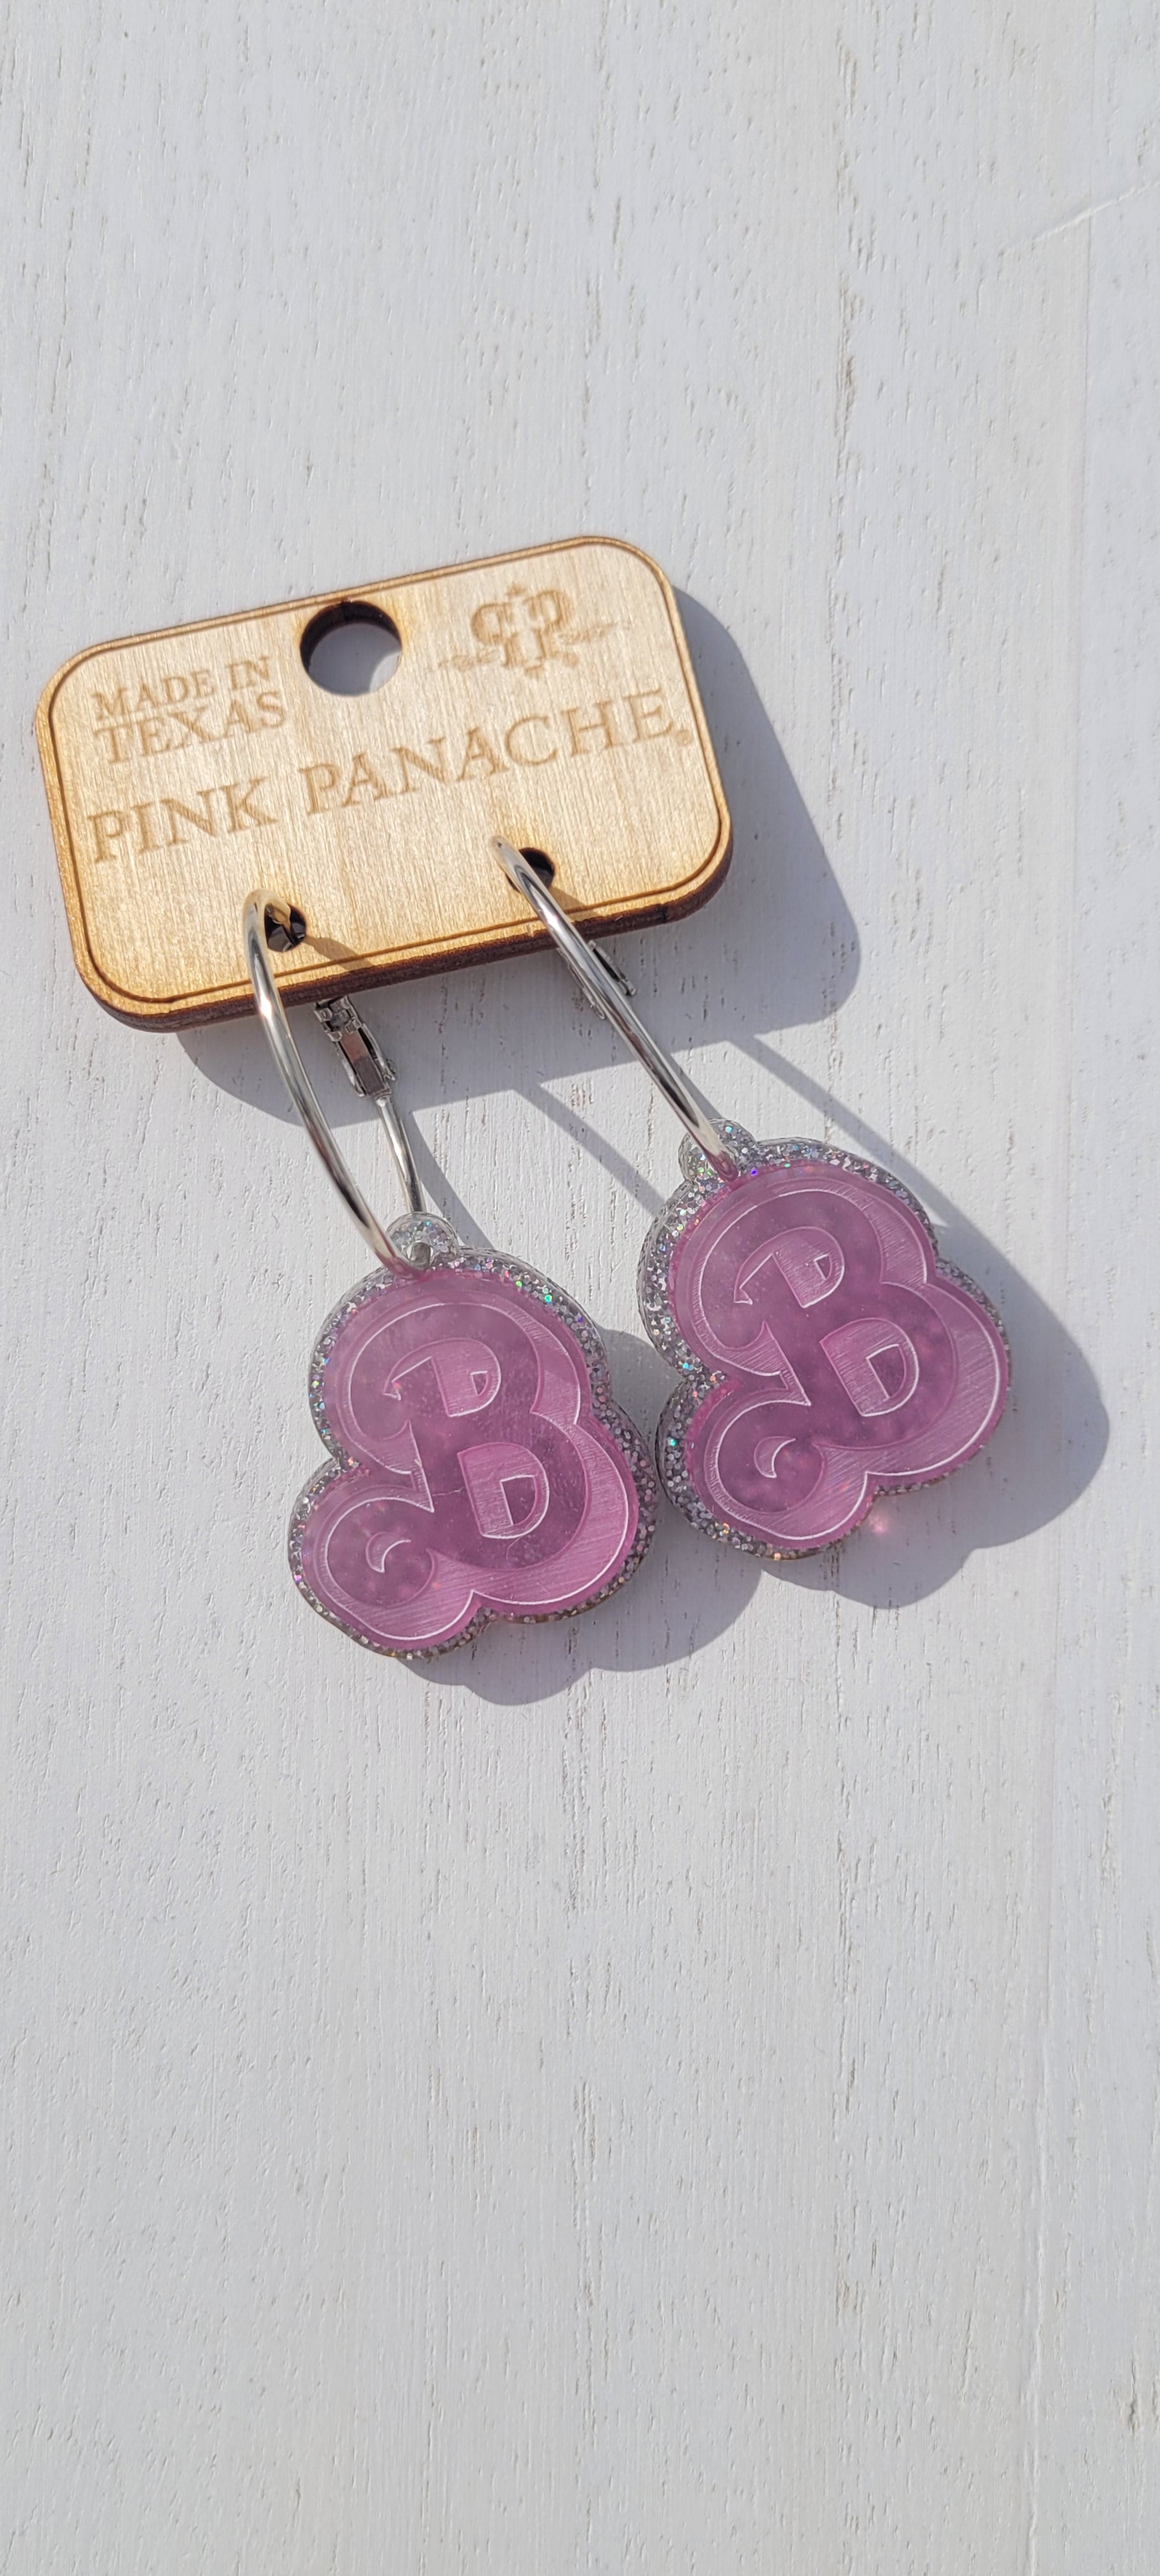 Pink Panache Barbie Earrings Color: Dark pink and silver glitter "B" on silver hoop earring Limited supply!